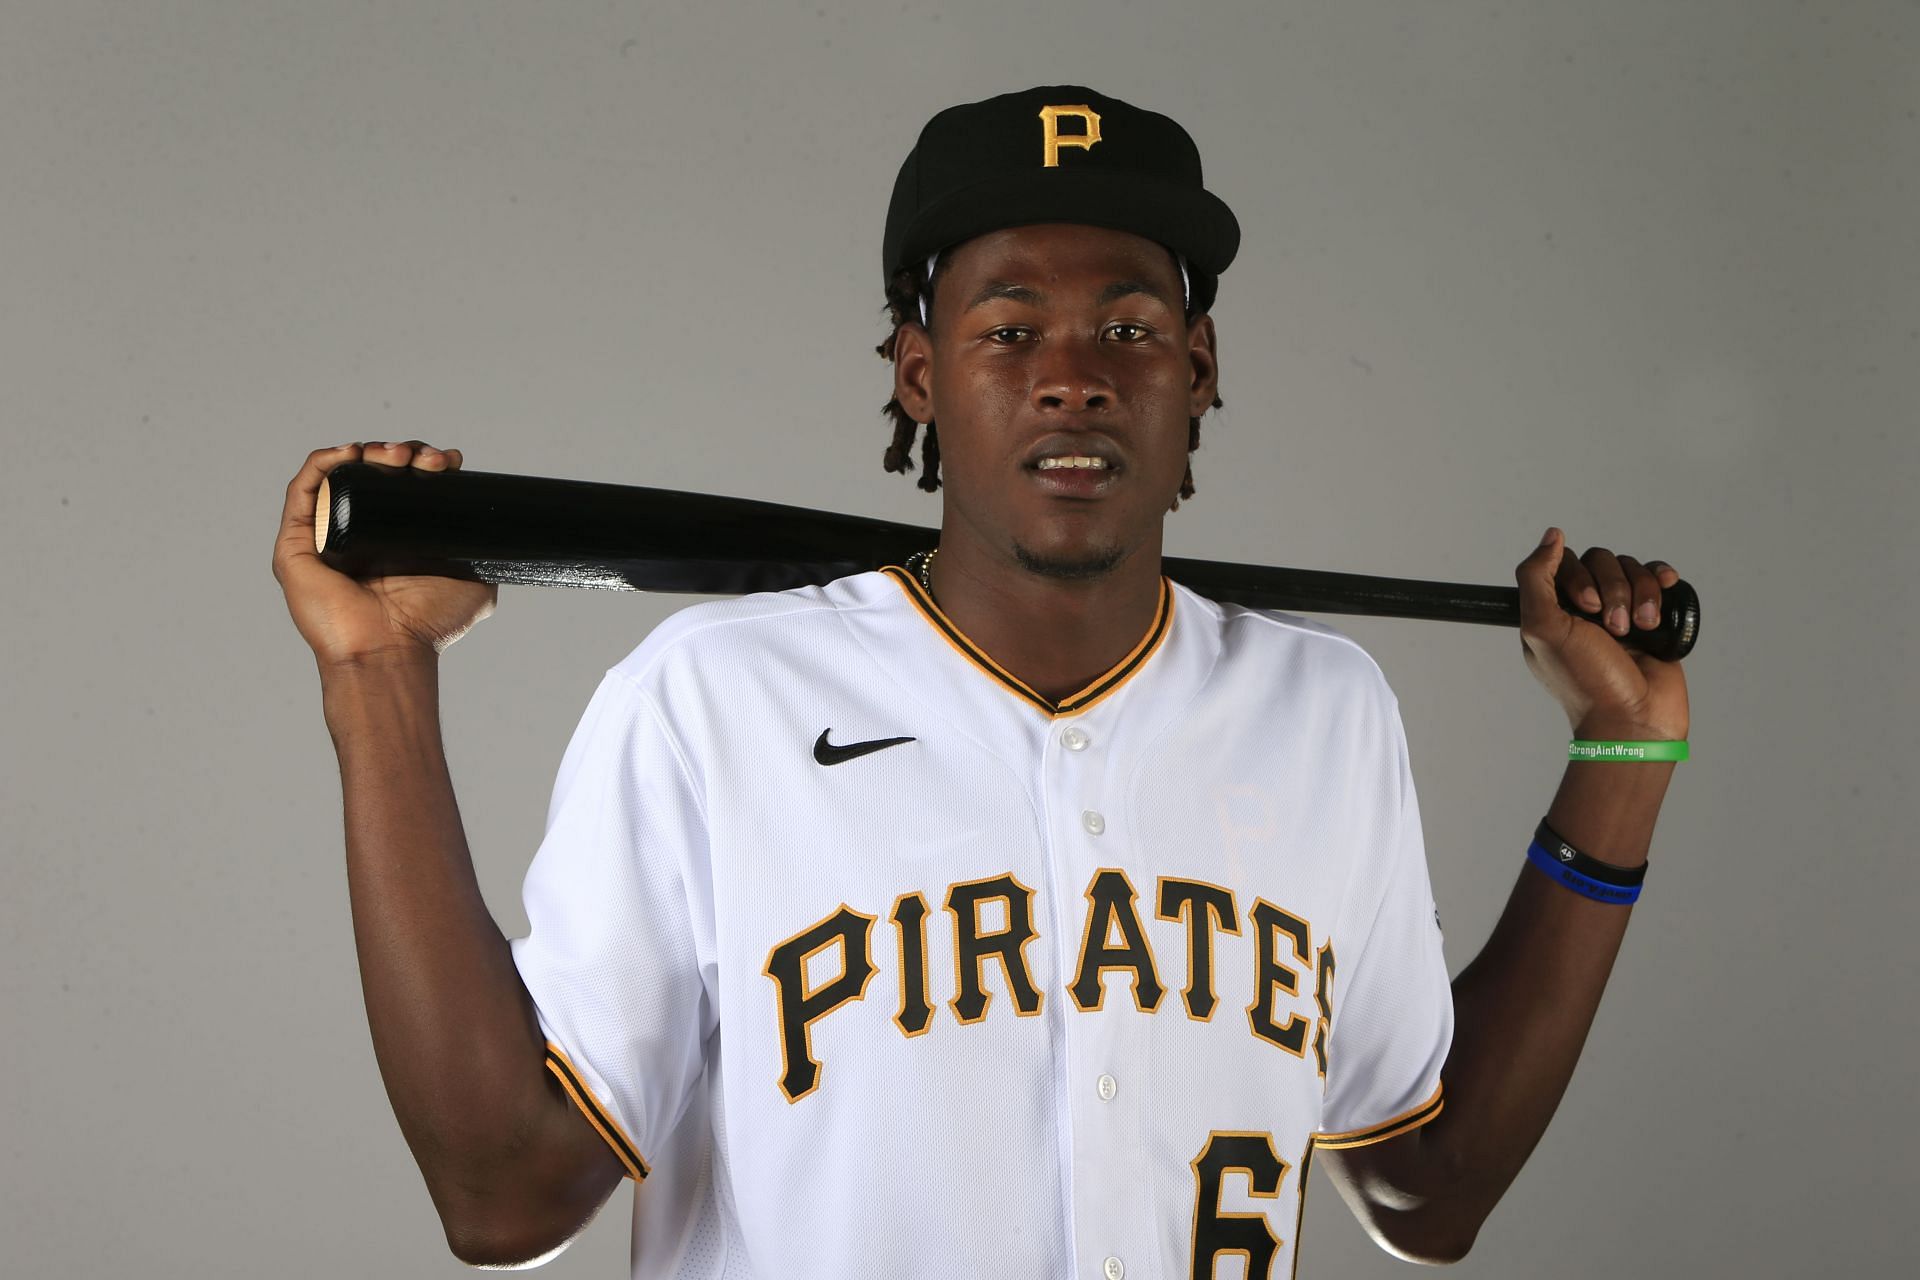 Oneil Cruz is 6ft 7in and can blast a baseball 122mph. But can he play?, Pittsburgh Pirates